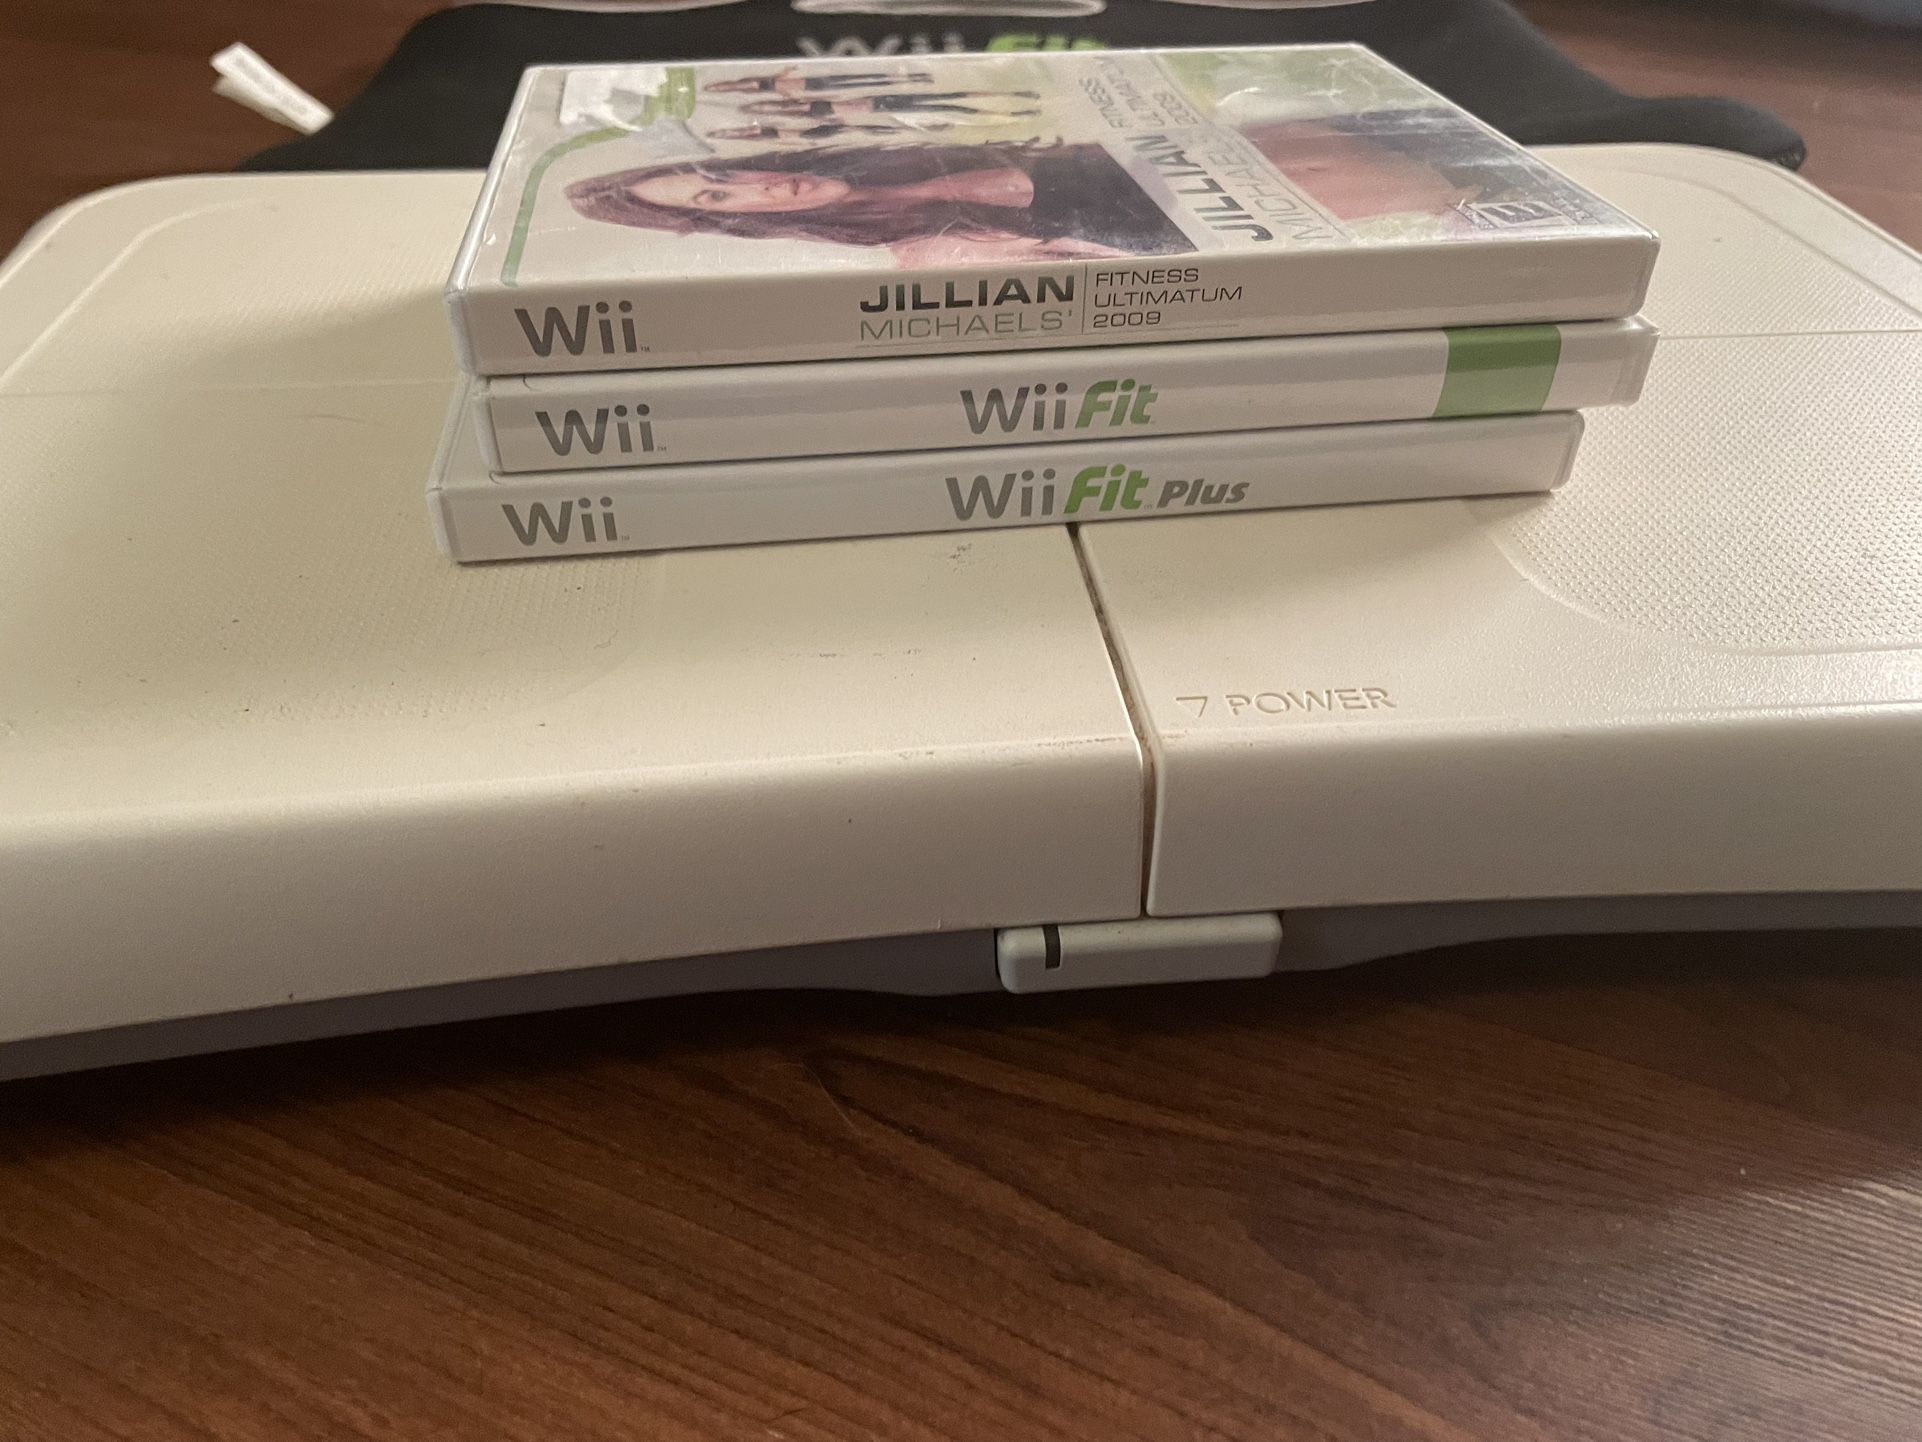 Wii Fit Games & Board $20 For All